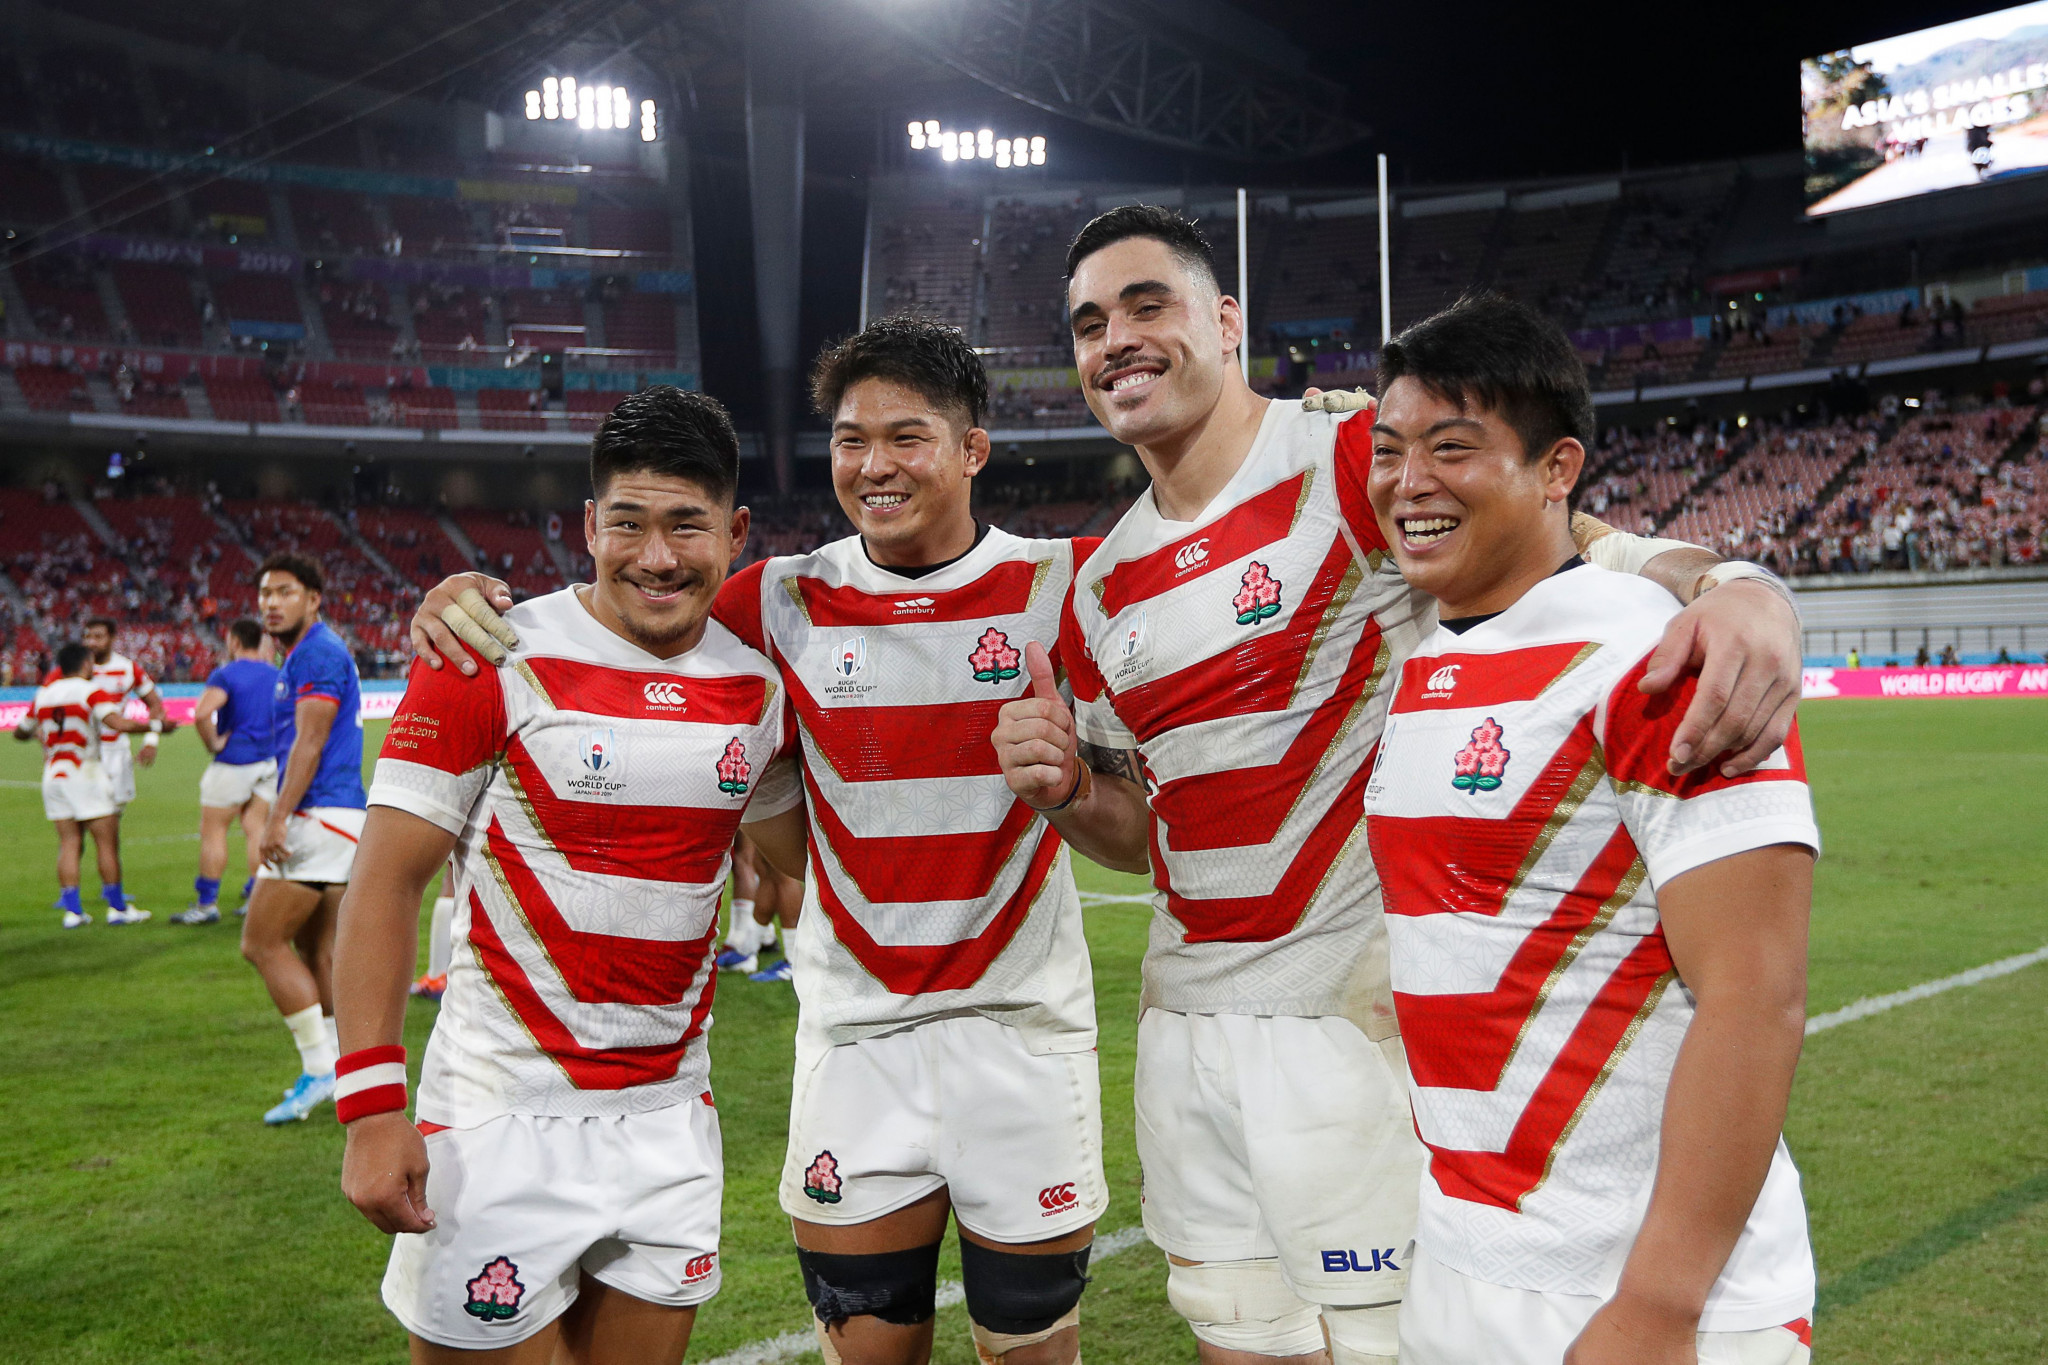 Japan's unbeaten start has undoubtedly helped the profile of the tournament in the region ©Getty Images